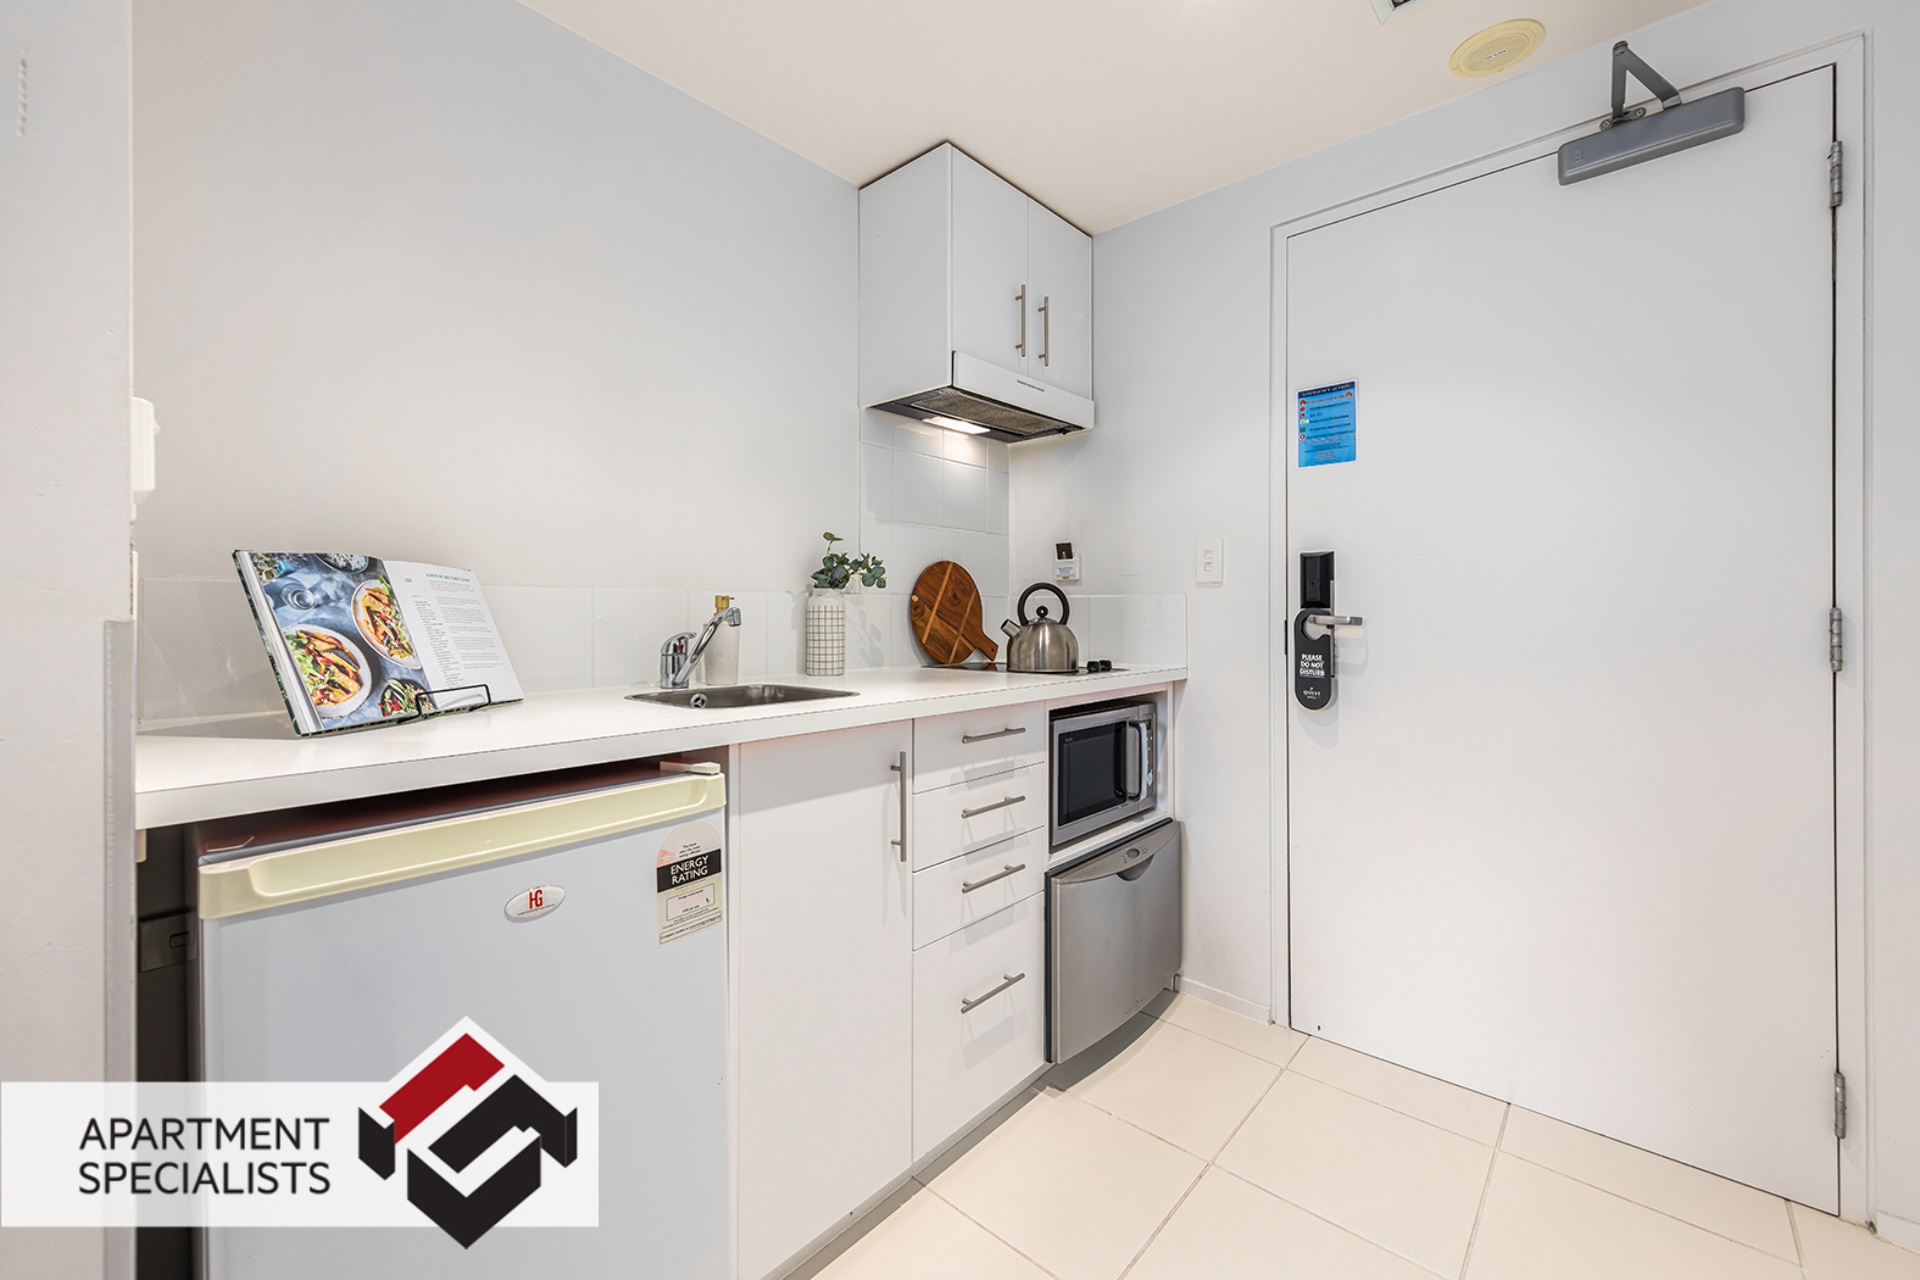 6 | 6 Heather Street, Parnell | Apartment Specialists